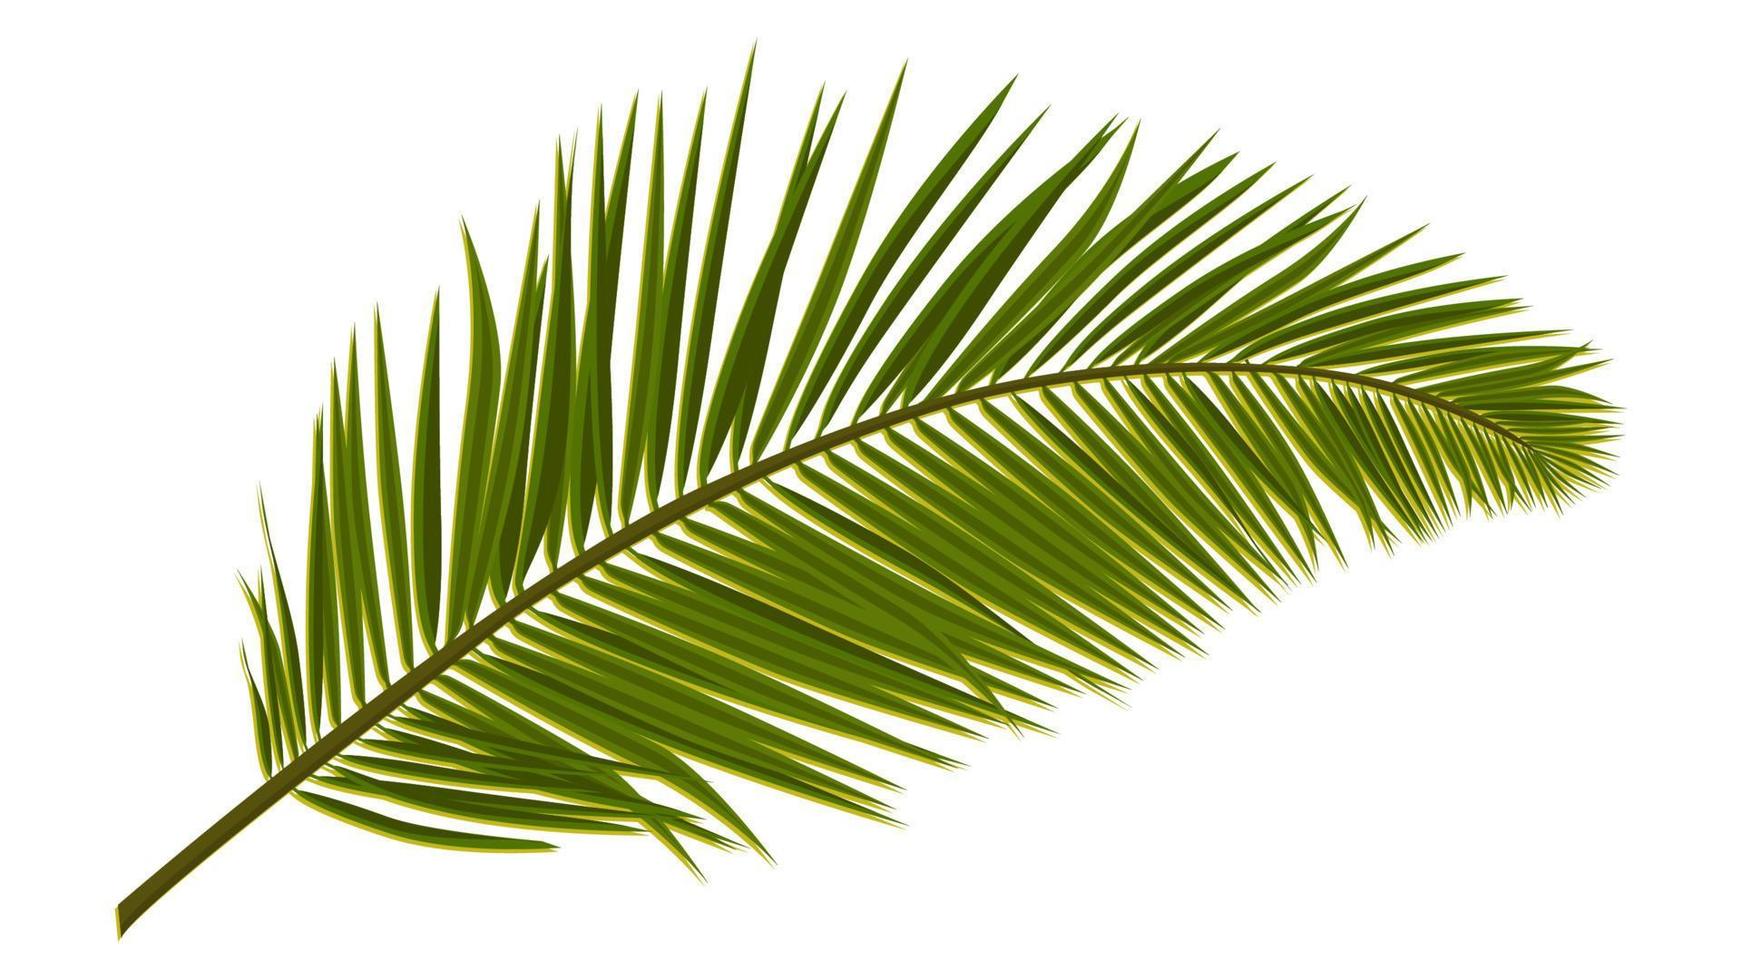 Green realistic palm leaves isolated on white. Palm branch for composing a collage. Vector illustration.